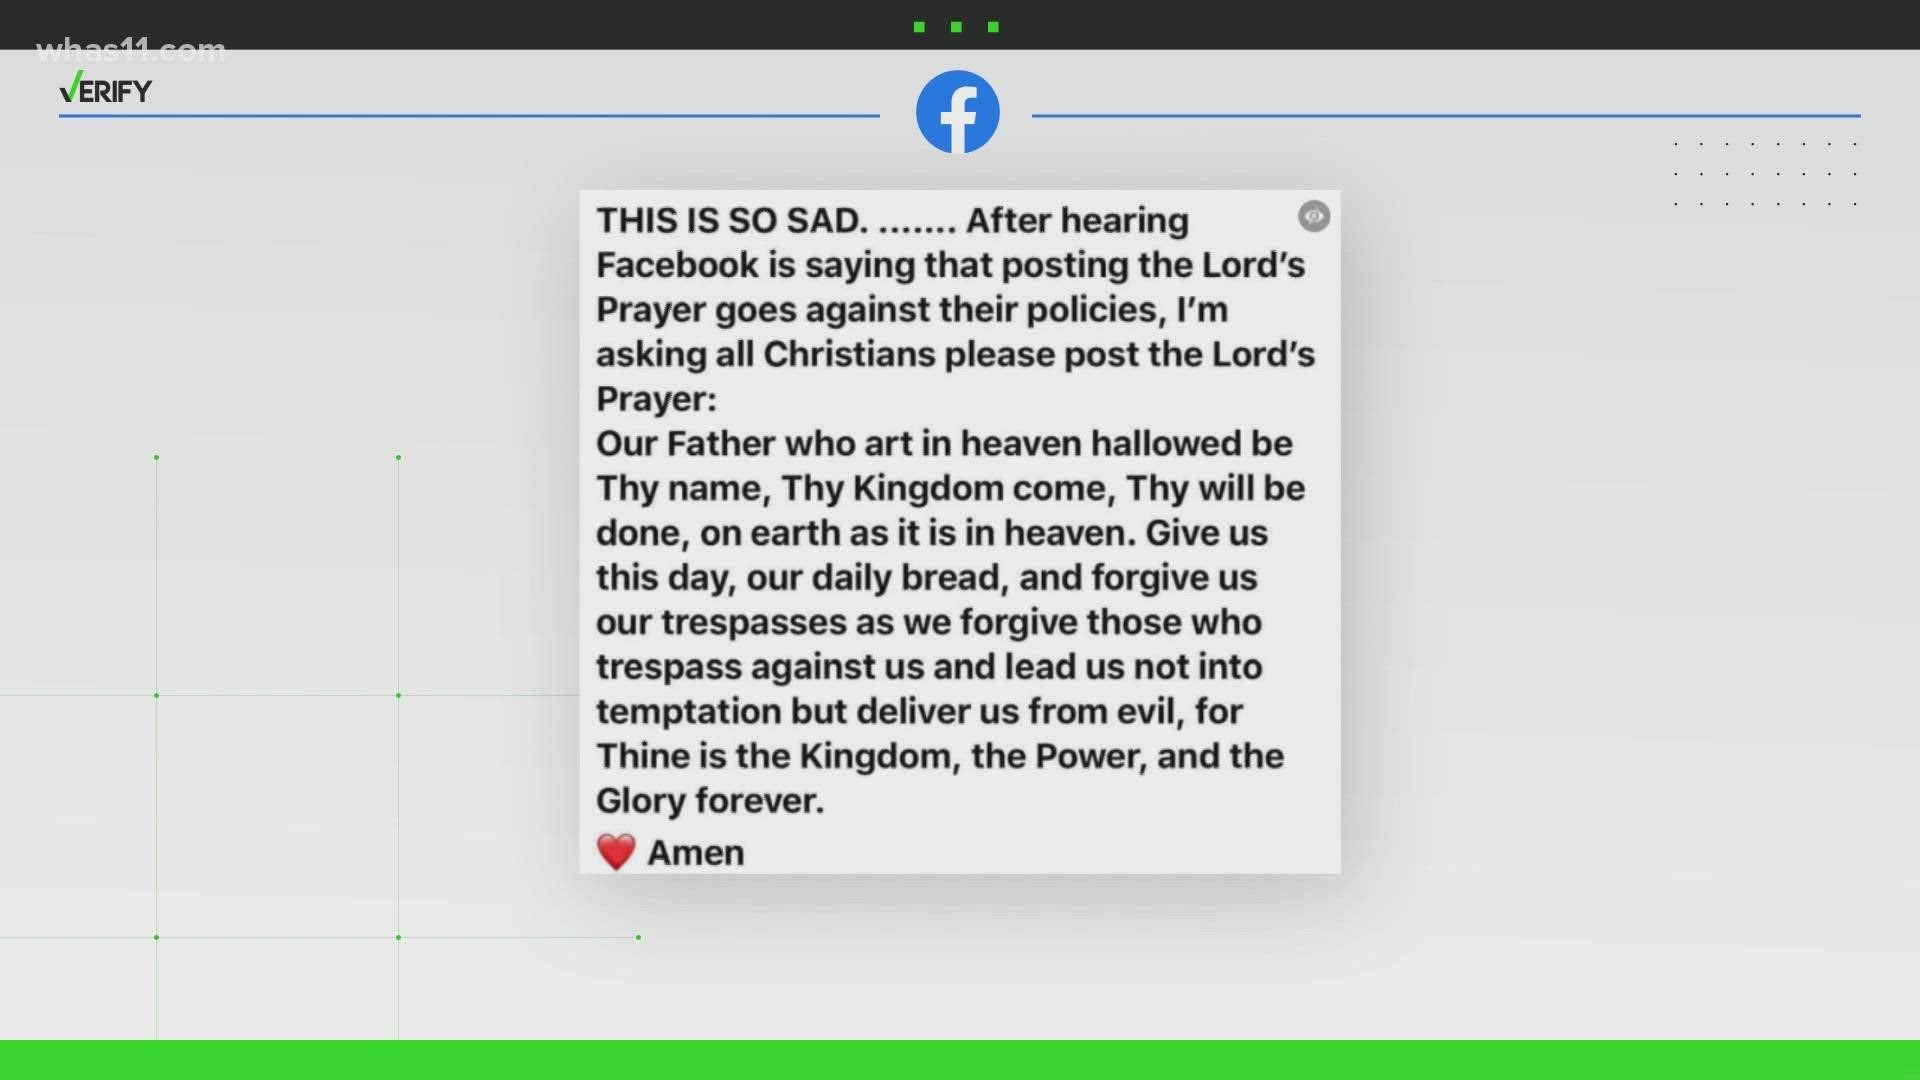 The only mention of religion or Christianity in Facebook's Community Standards is in a section banning hate speech against a religious affiliation from the site.